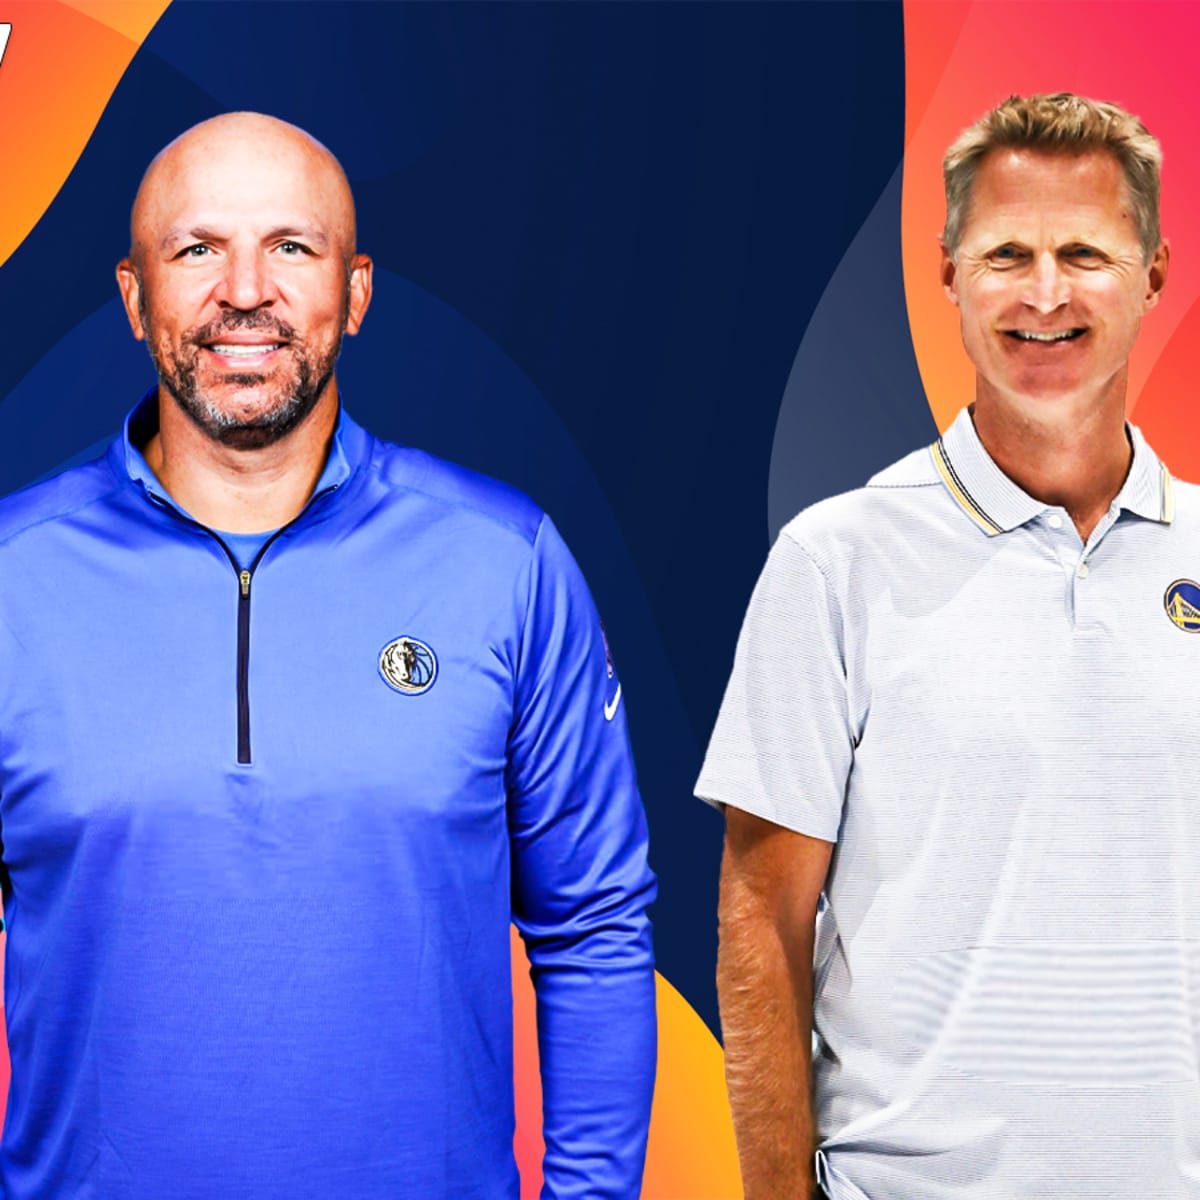 Steve Kerr showered Jason Kidd with praise for his work as a